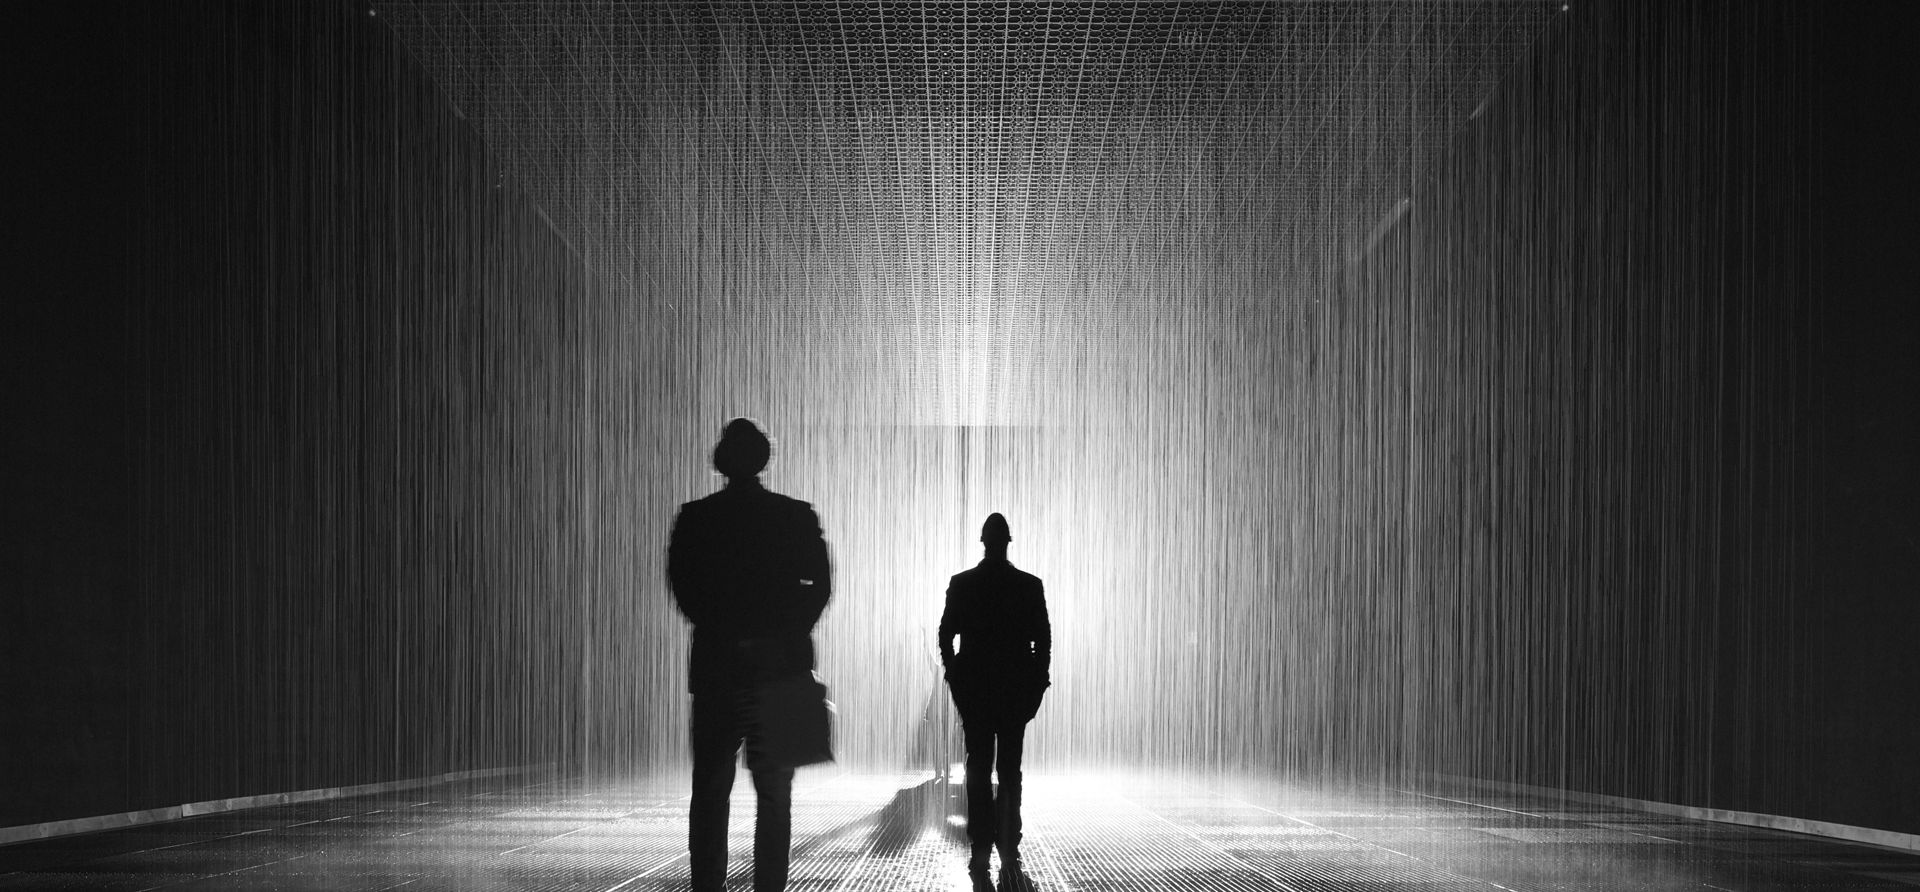 A Man That Is Standing In A Rain Room